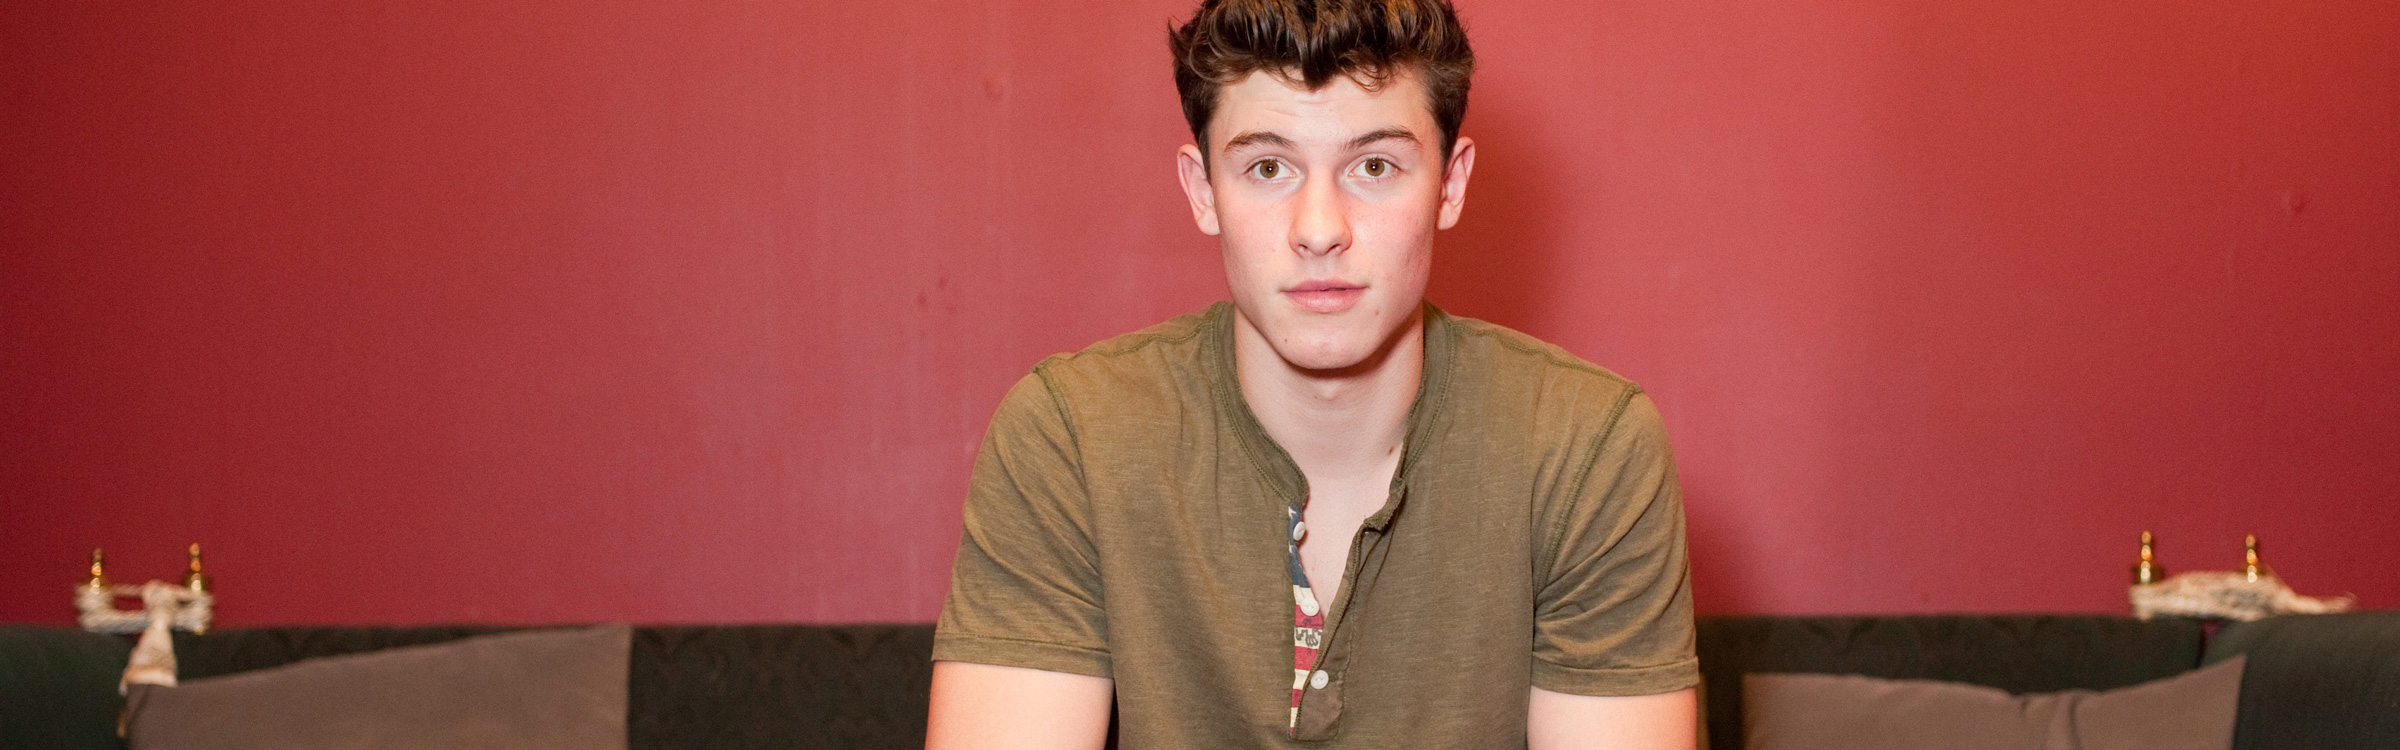 Shawnmendes